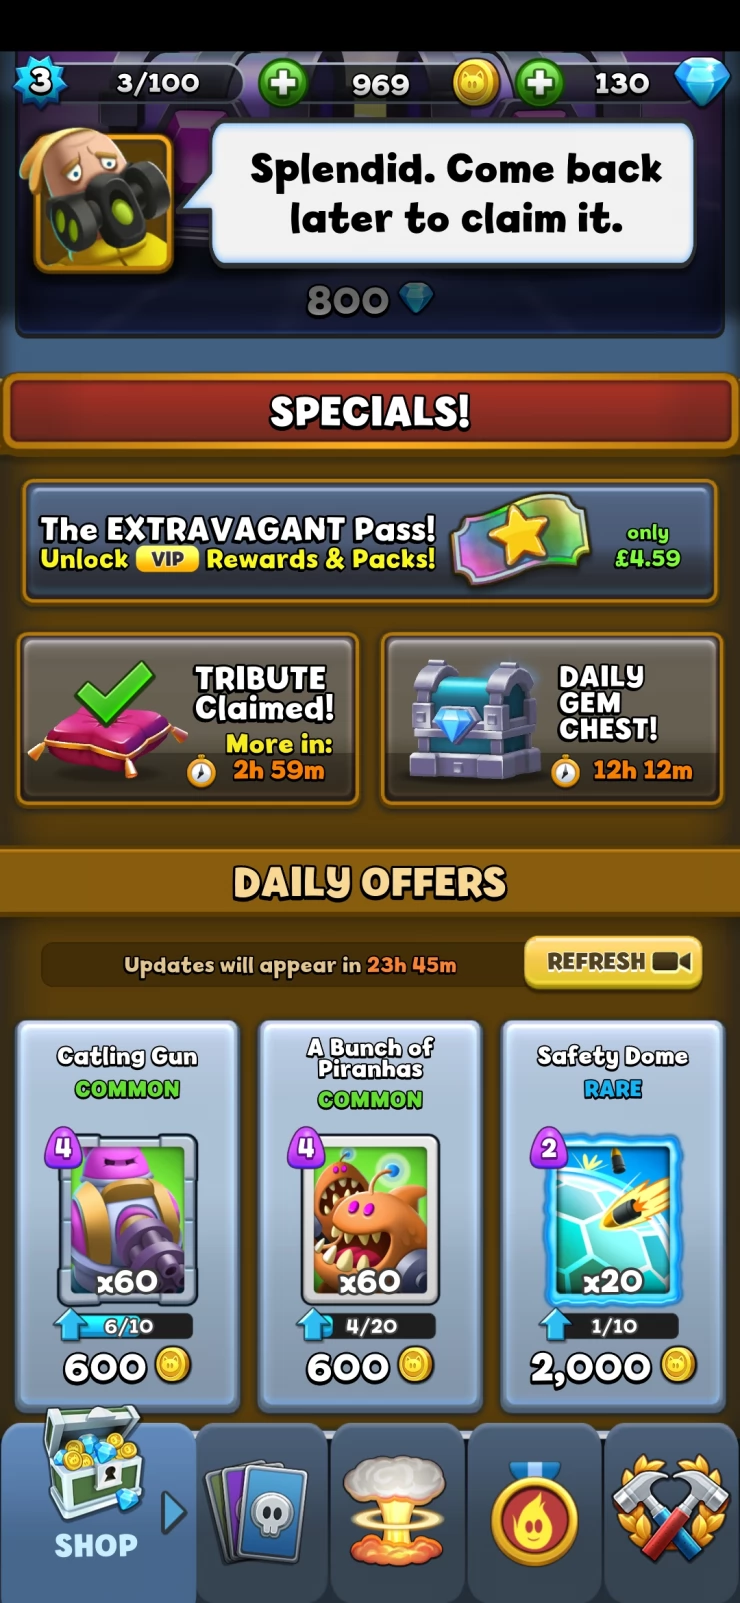 Get cards and upgrade them all at the beginning